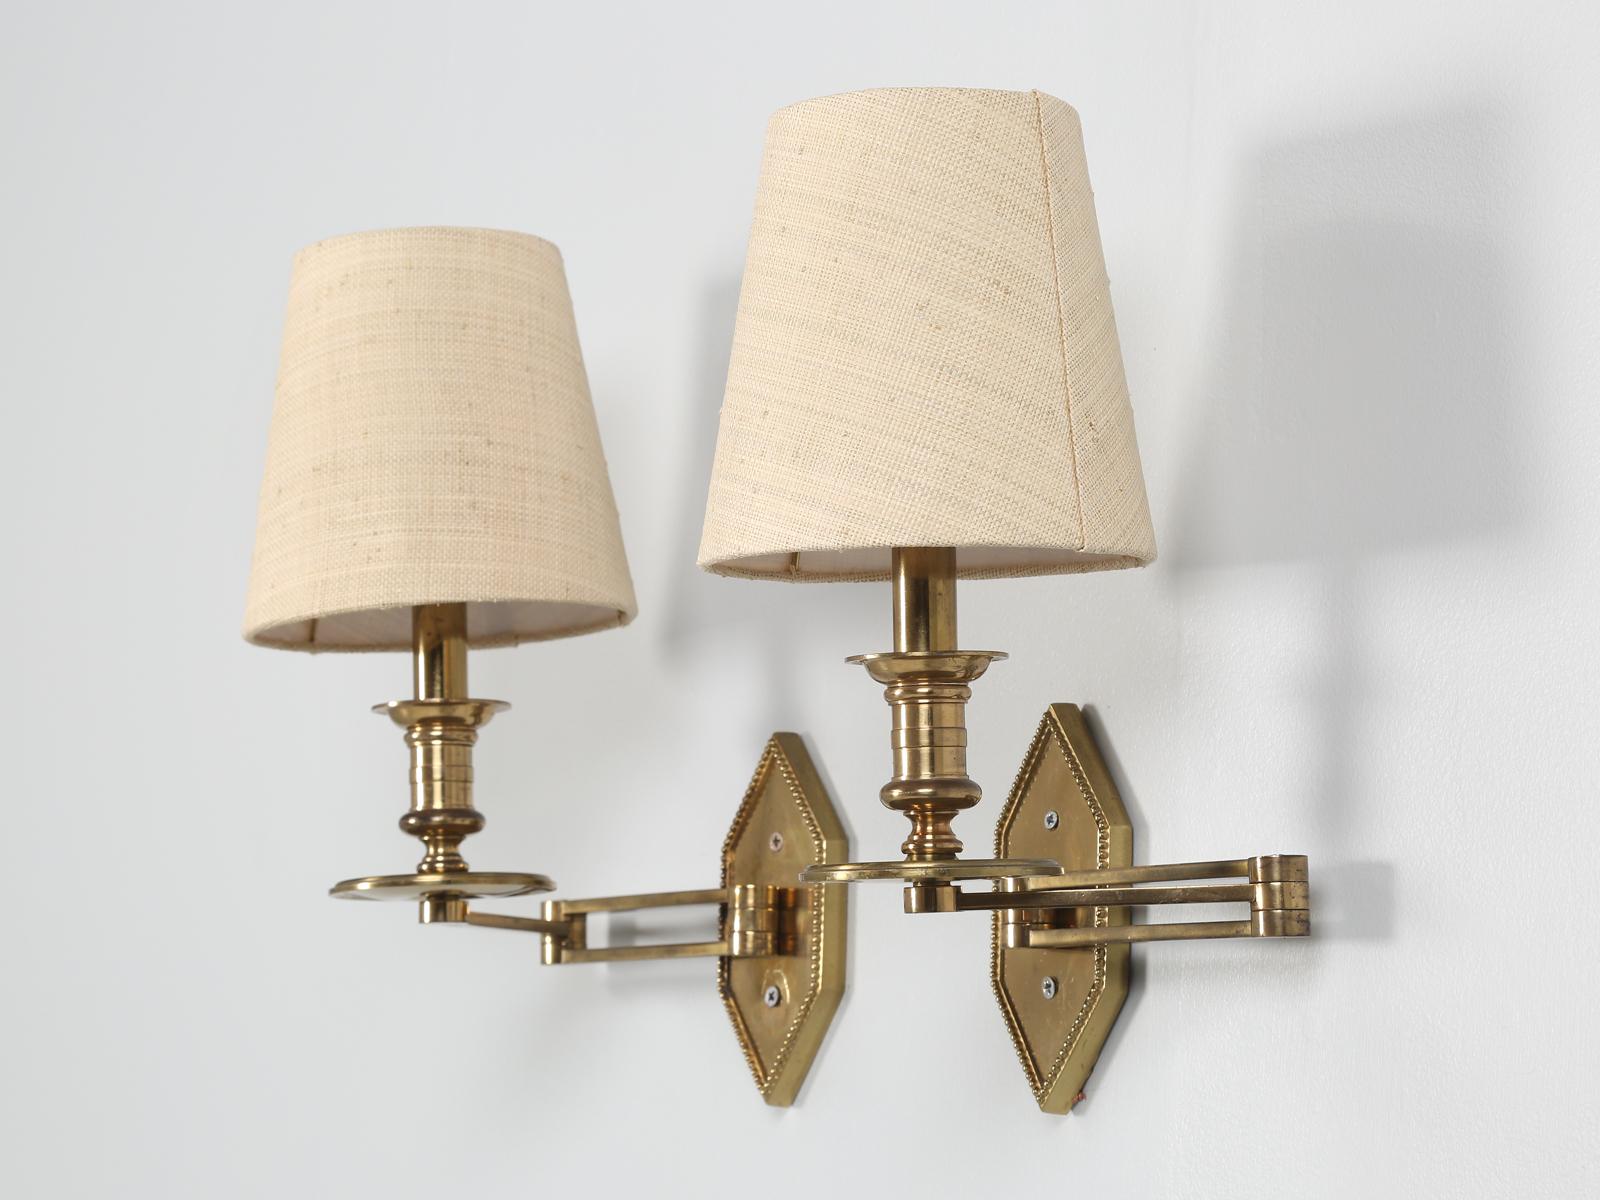 Attributed to Maison Jansen, pair of articulated or swing arm brass sconces in nice original condition. We believe that the brass sconces were made in the late 40's or 50's and are idea flanking a bed. 

**Nice patina throughout. Back plates are